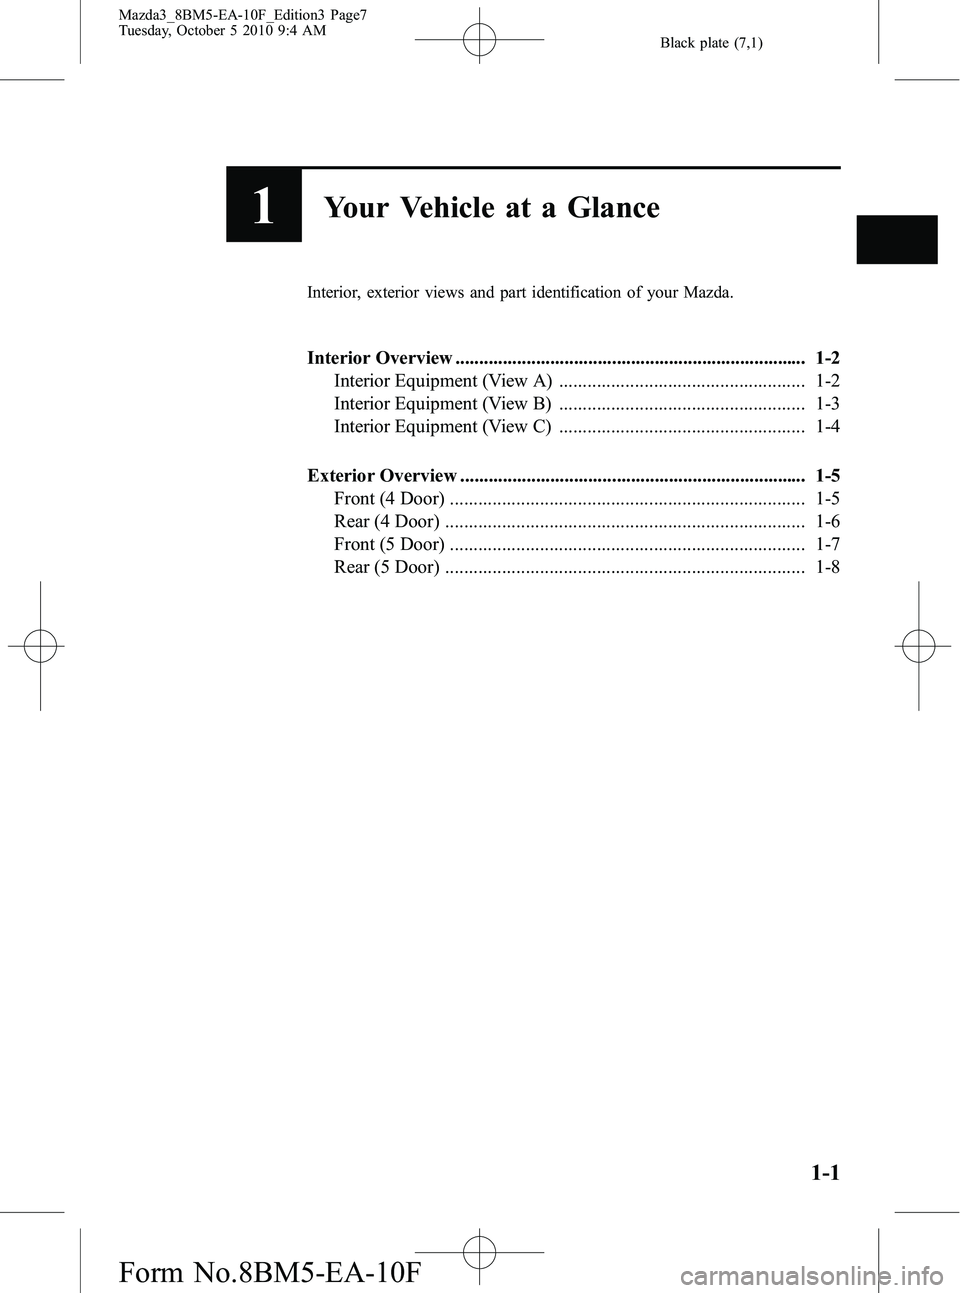 MAZDA MODEL 3 4-DOOR 2011  Owners Manual Black plate (7,1)
1Your Vehicle at a Glance
Interior, exterior views and part identification of your Mazda.
Interior Overview ..........................................................................